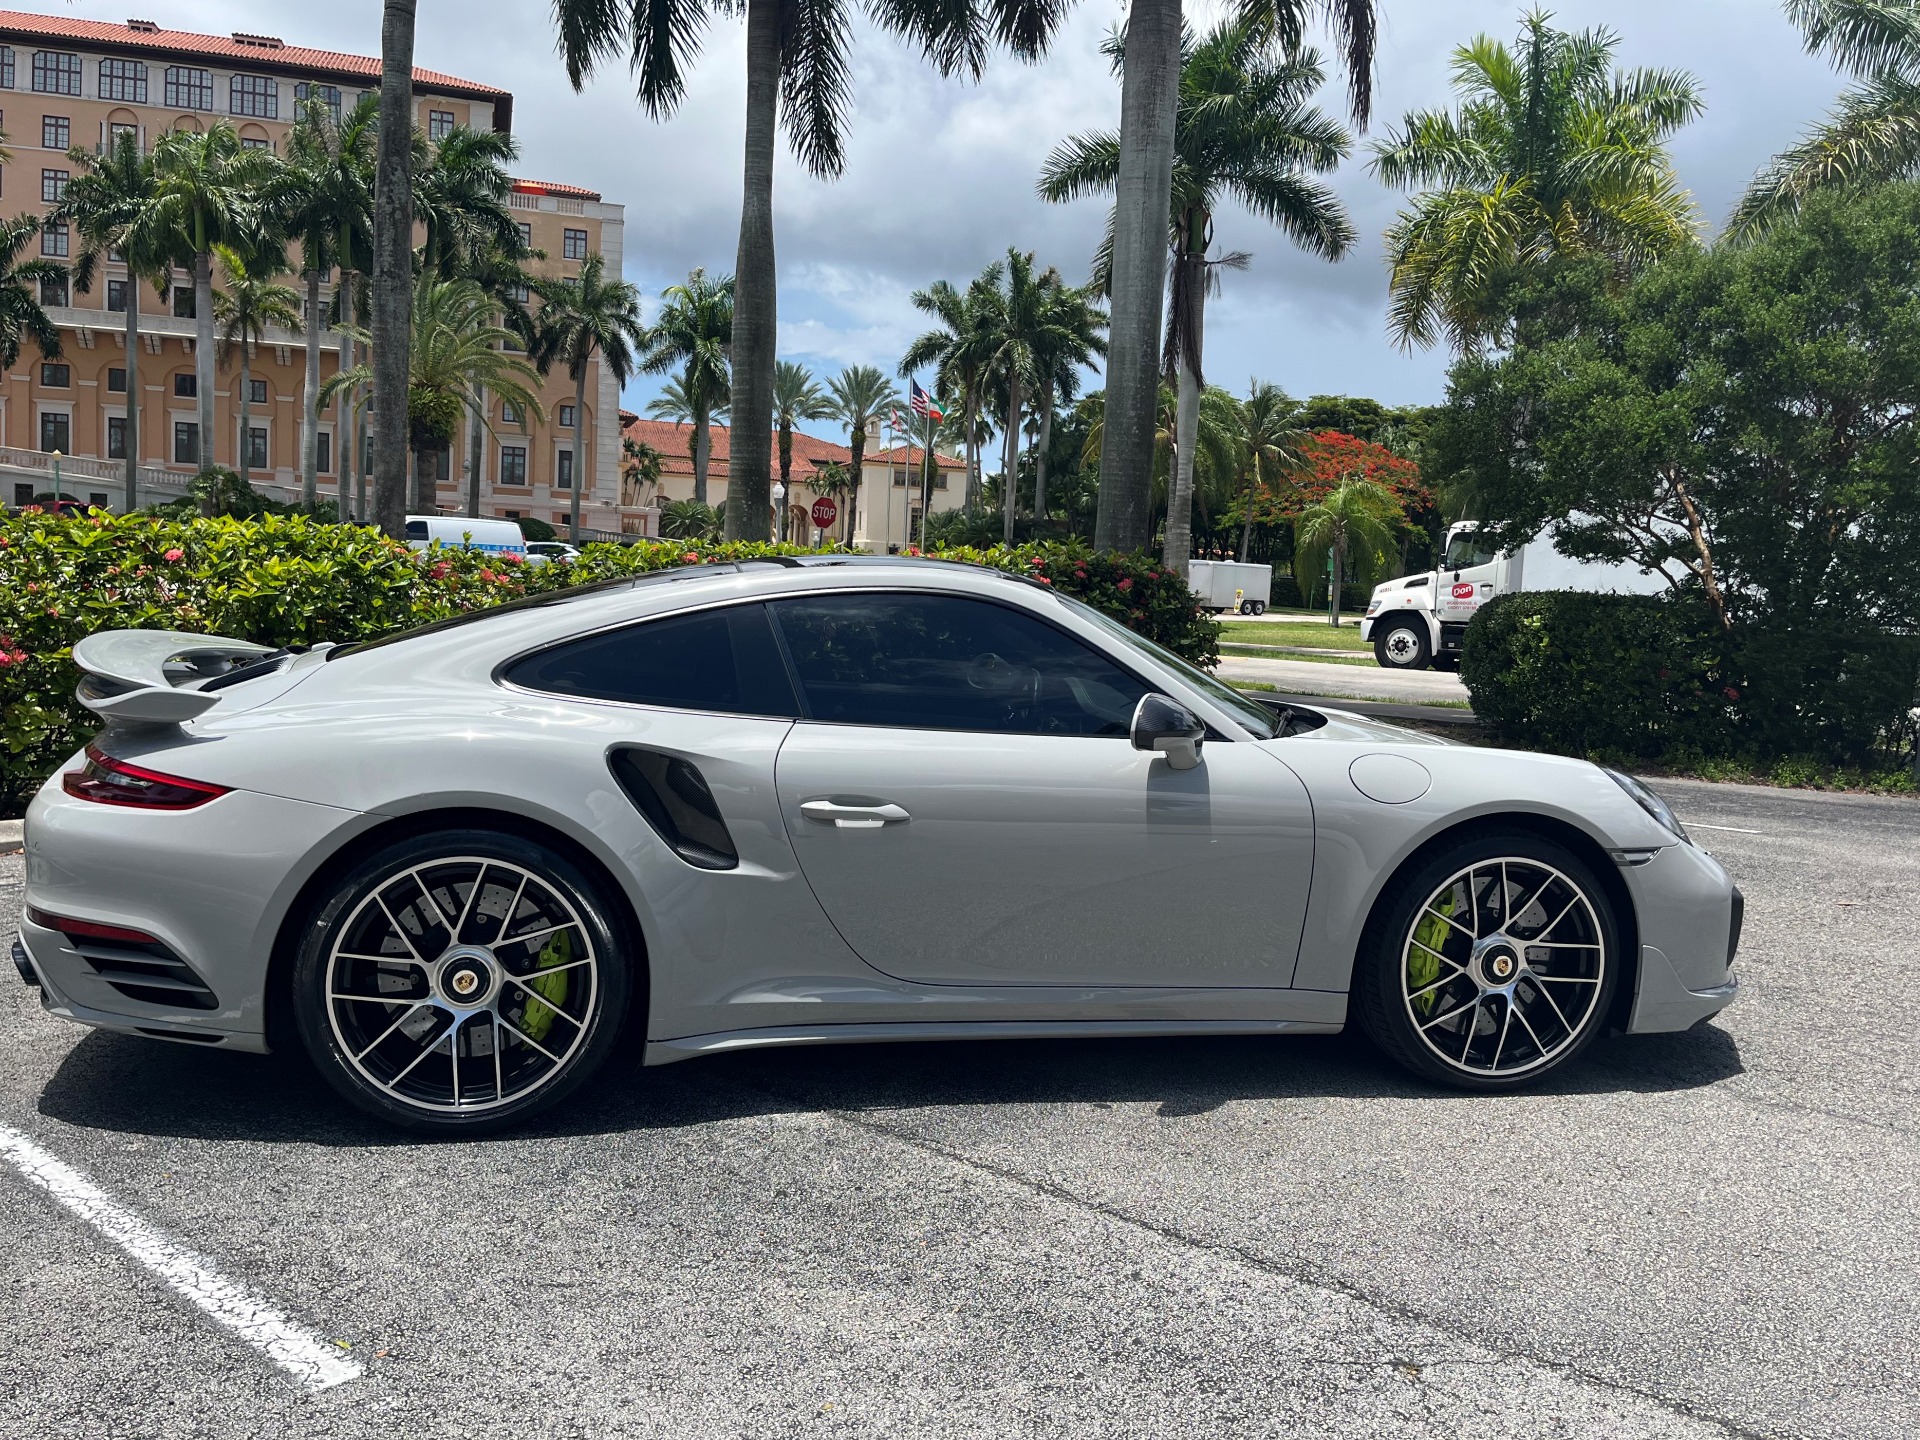 Used 2018 Porsche 911 Turbo S for sale Sold at The Gables Sports Cars in Miami FL 33146 4